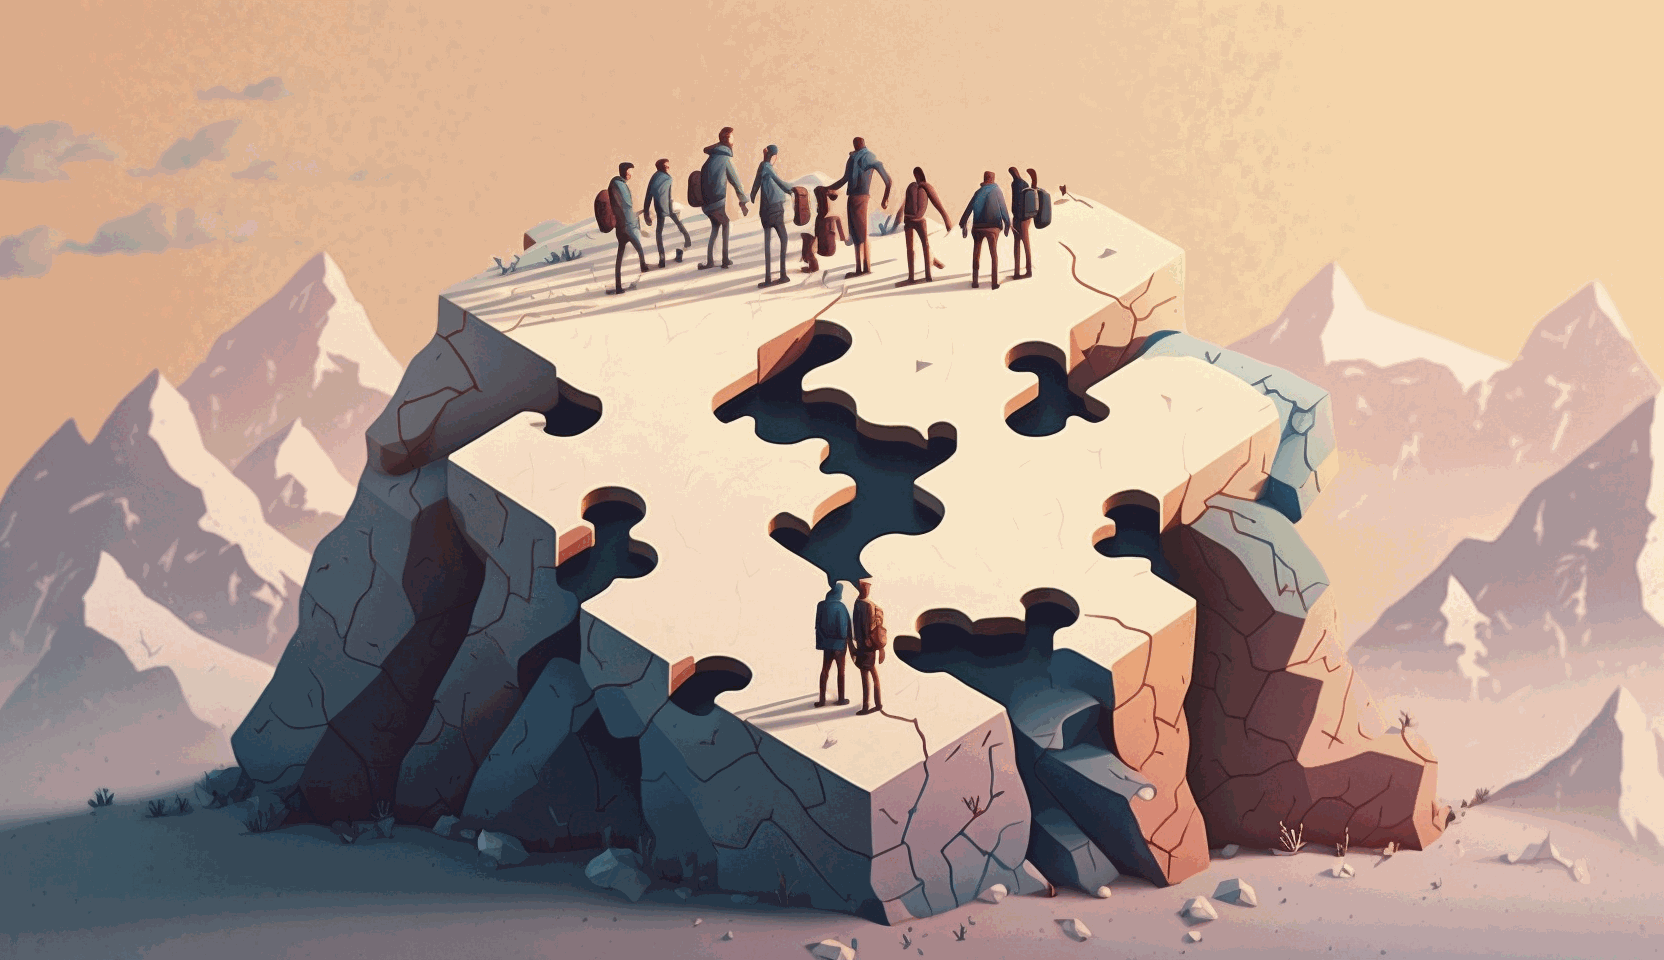 A group of people standing on a summit holding hands, with puzzle pieces fitting together in the foreground.